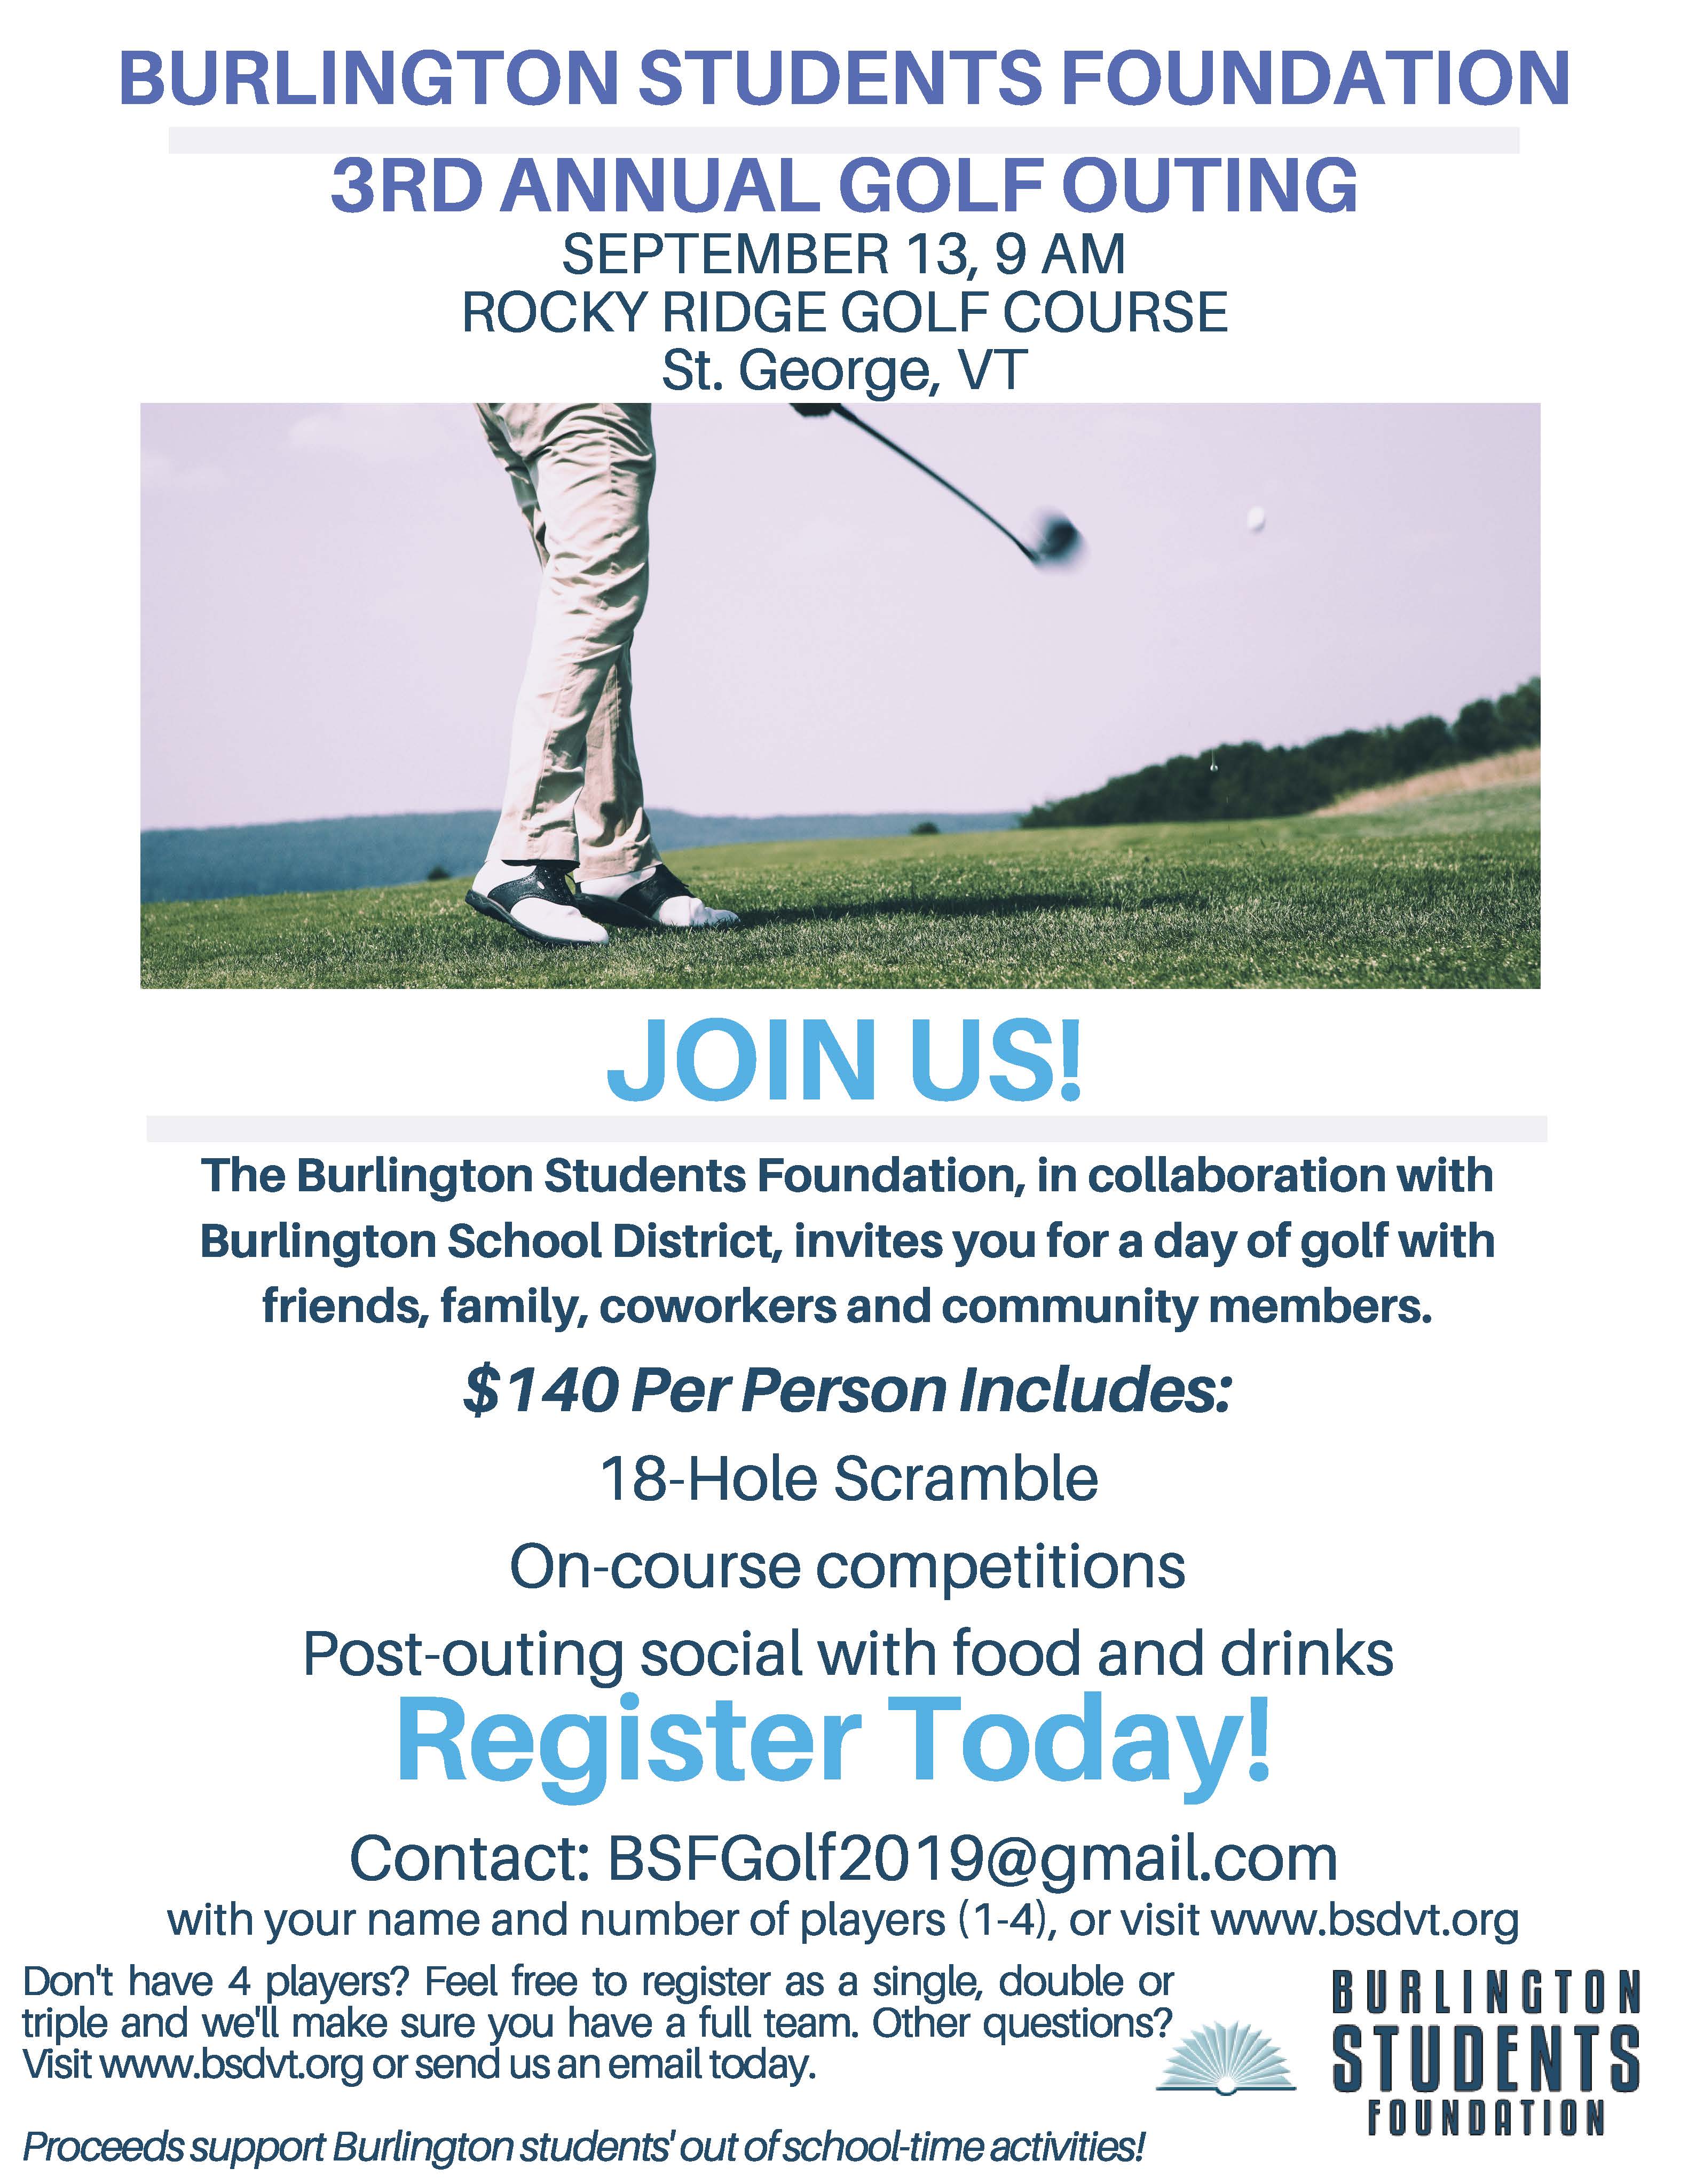 Final Golf Outing Flyer, 2019